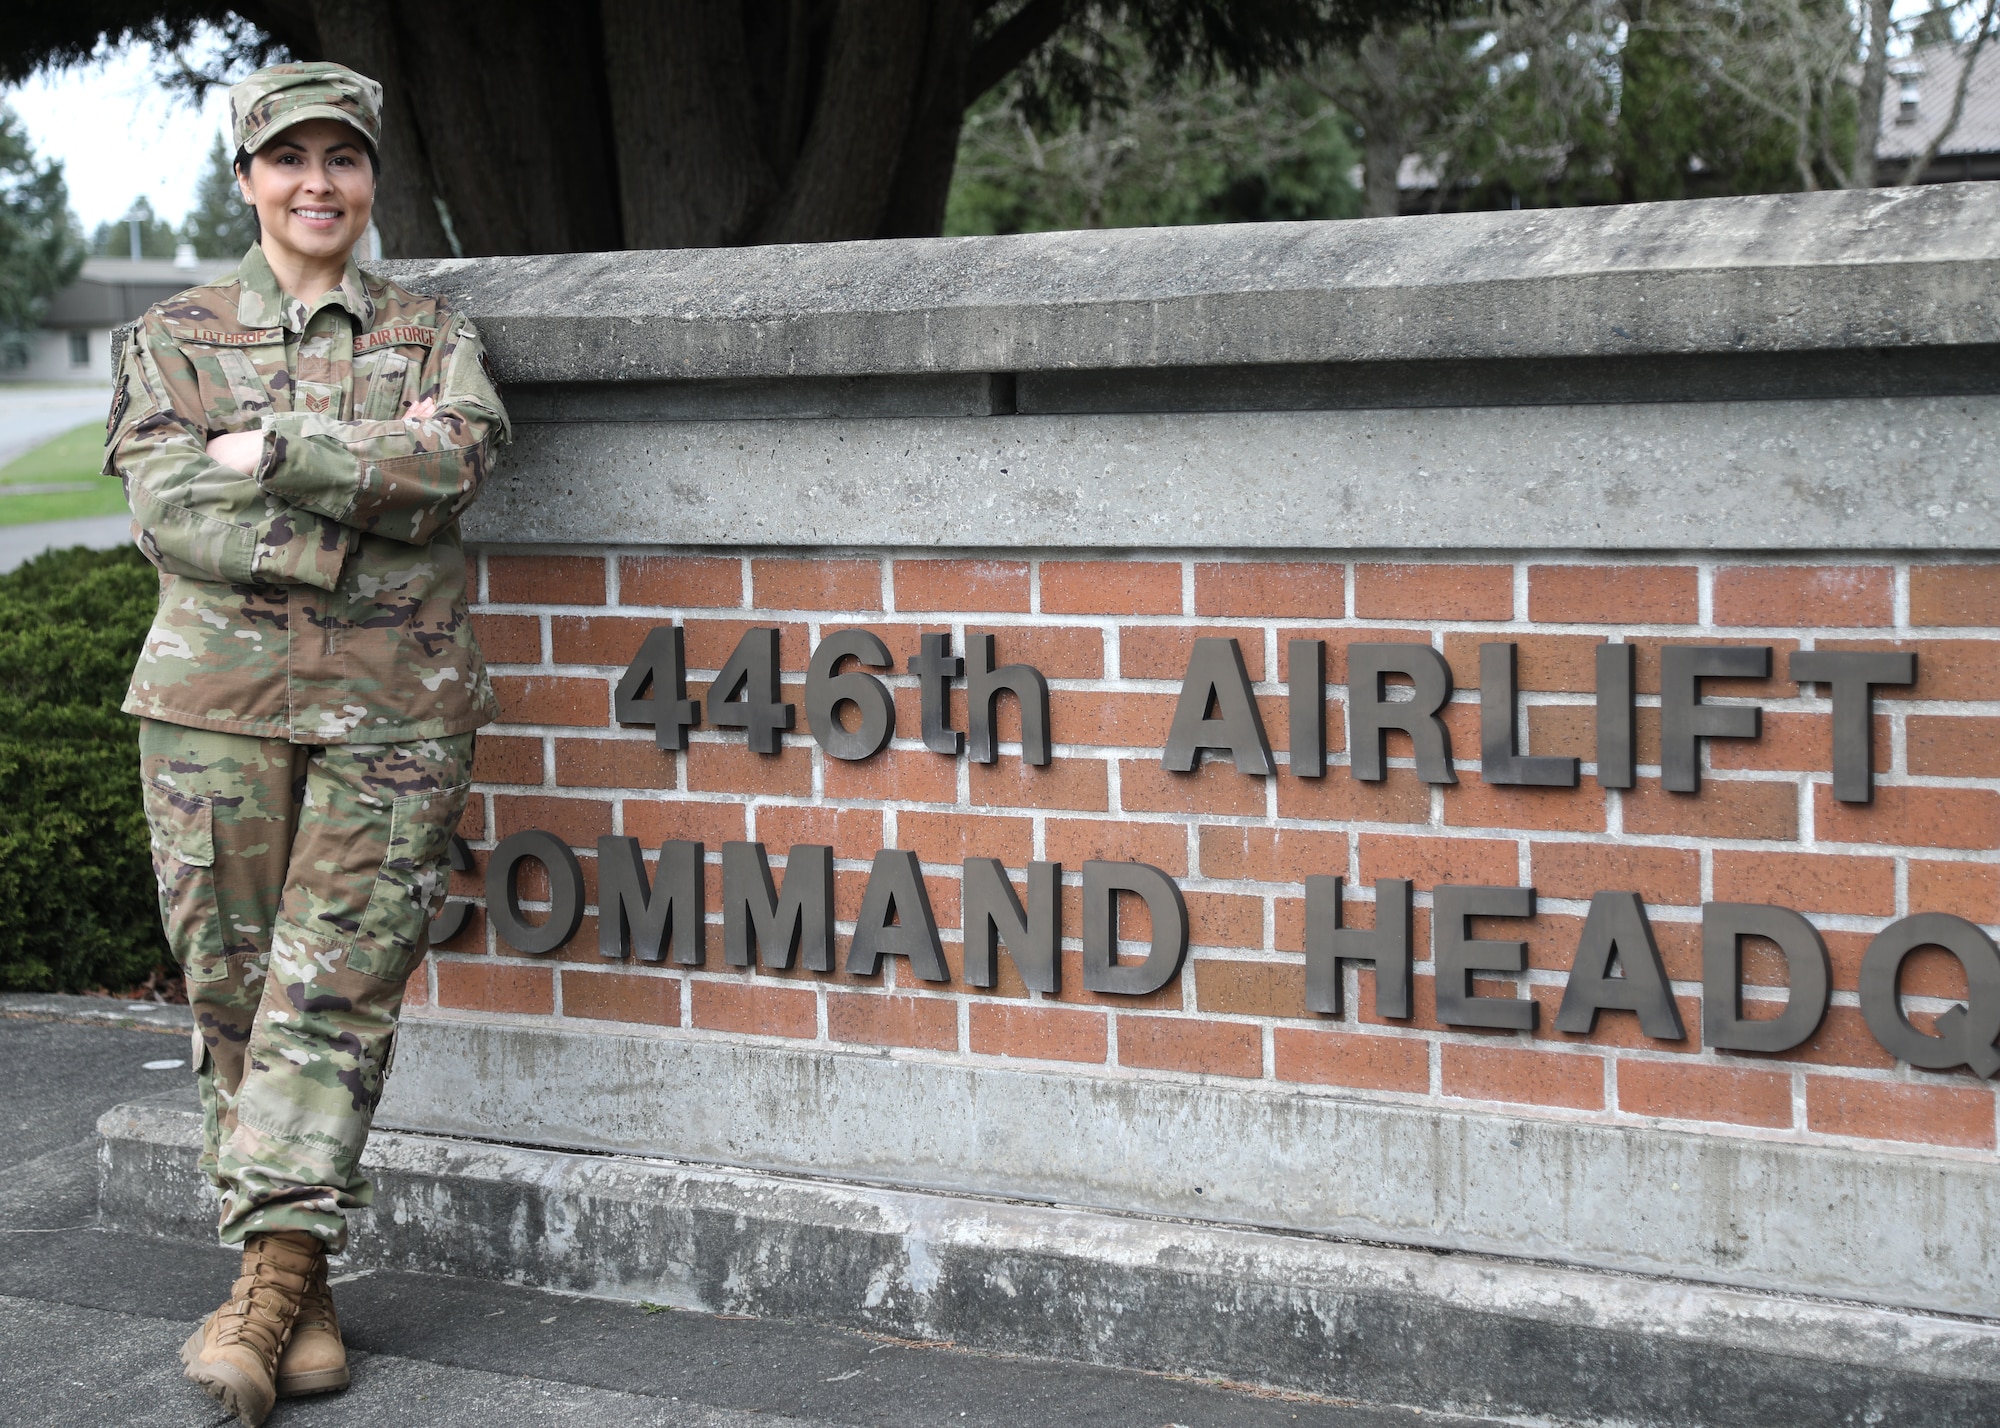 U.S. Air Force Staff Sgt. Crystal Y. Lothrop, 446th Force Support Squadron education and training technician, poses outside the 446th Airlift Wing headquarters building on Joint Base Lewis-McChord, Washington, Feb. 25, 2020.